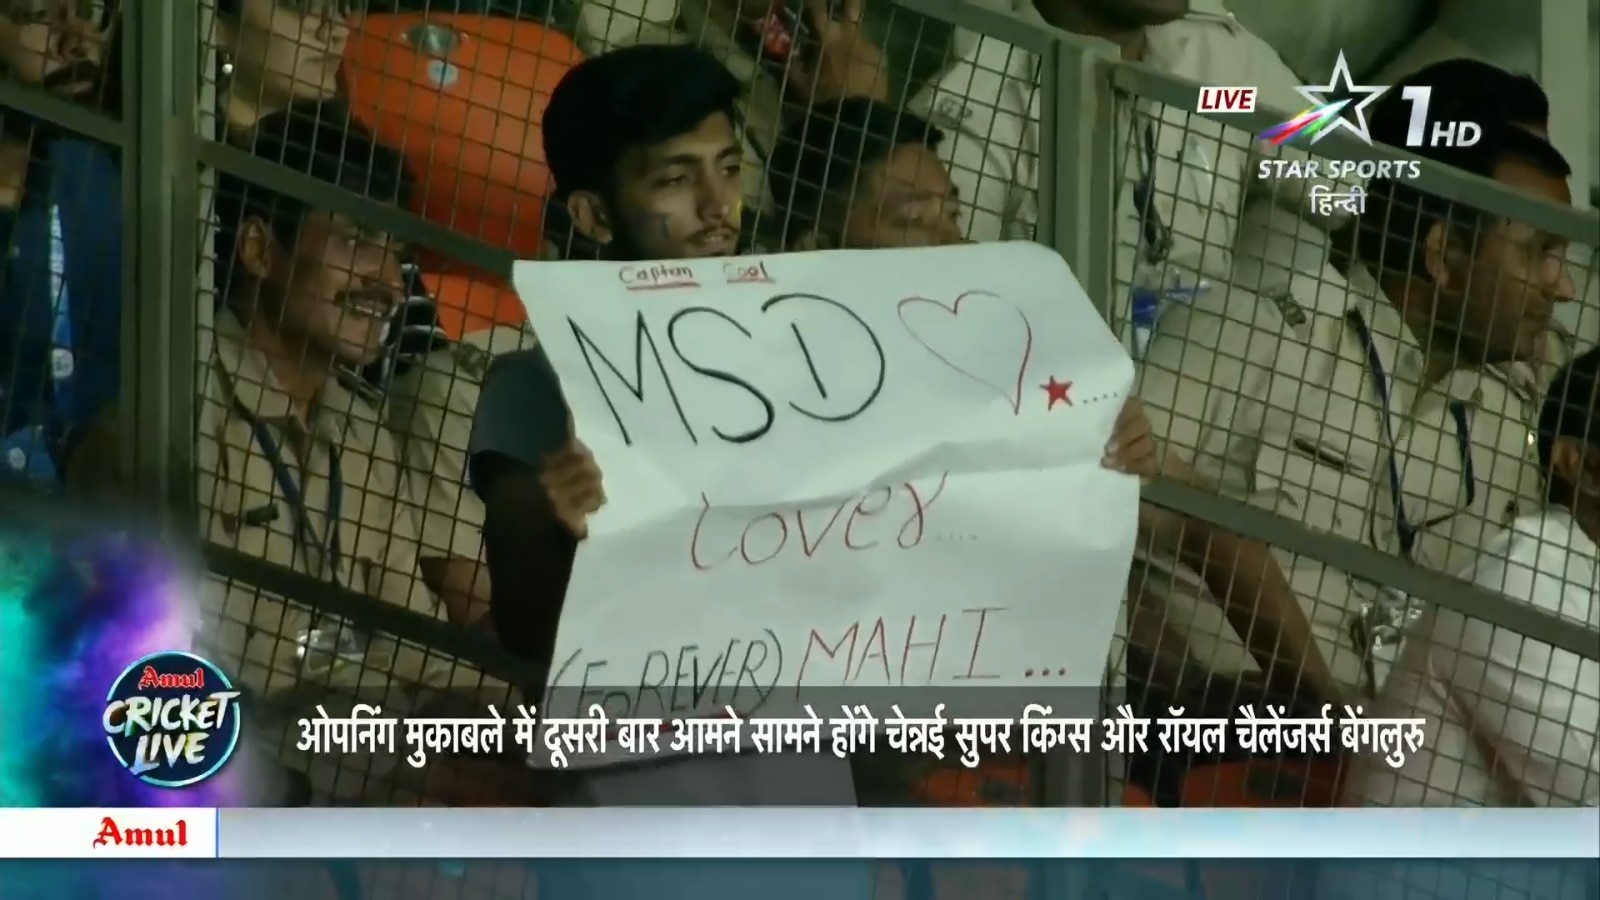 Dhoni Poster Banner In Match Against IPL 2024 First Match Vs RCB